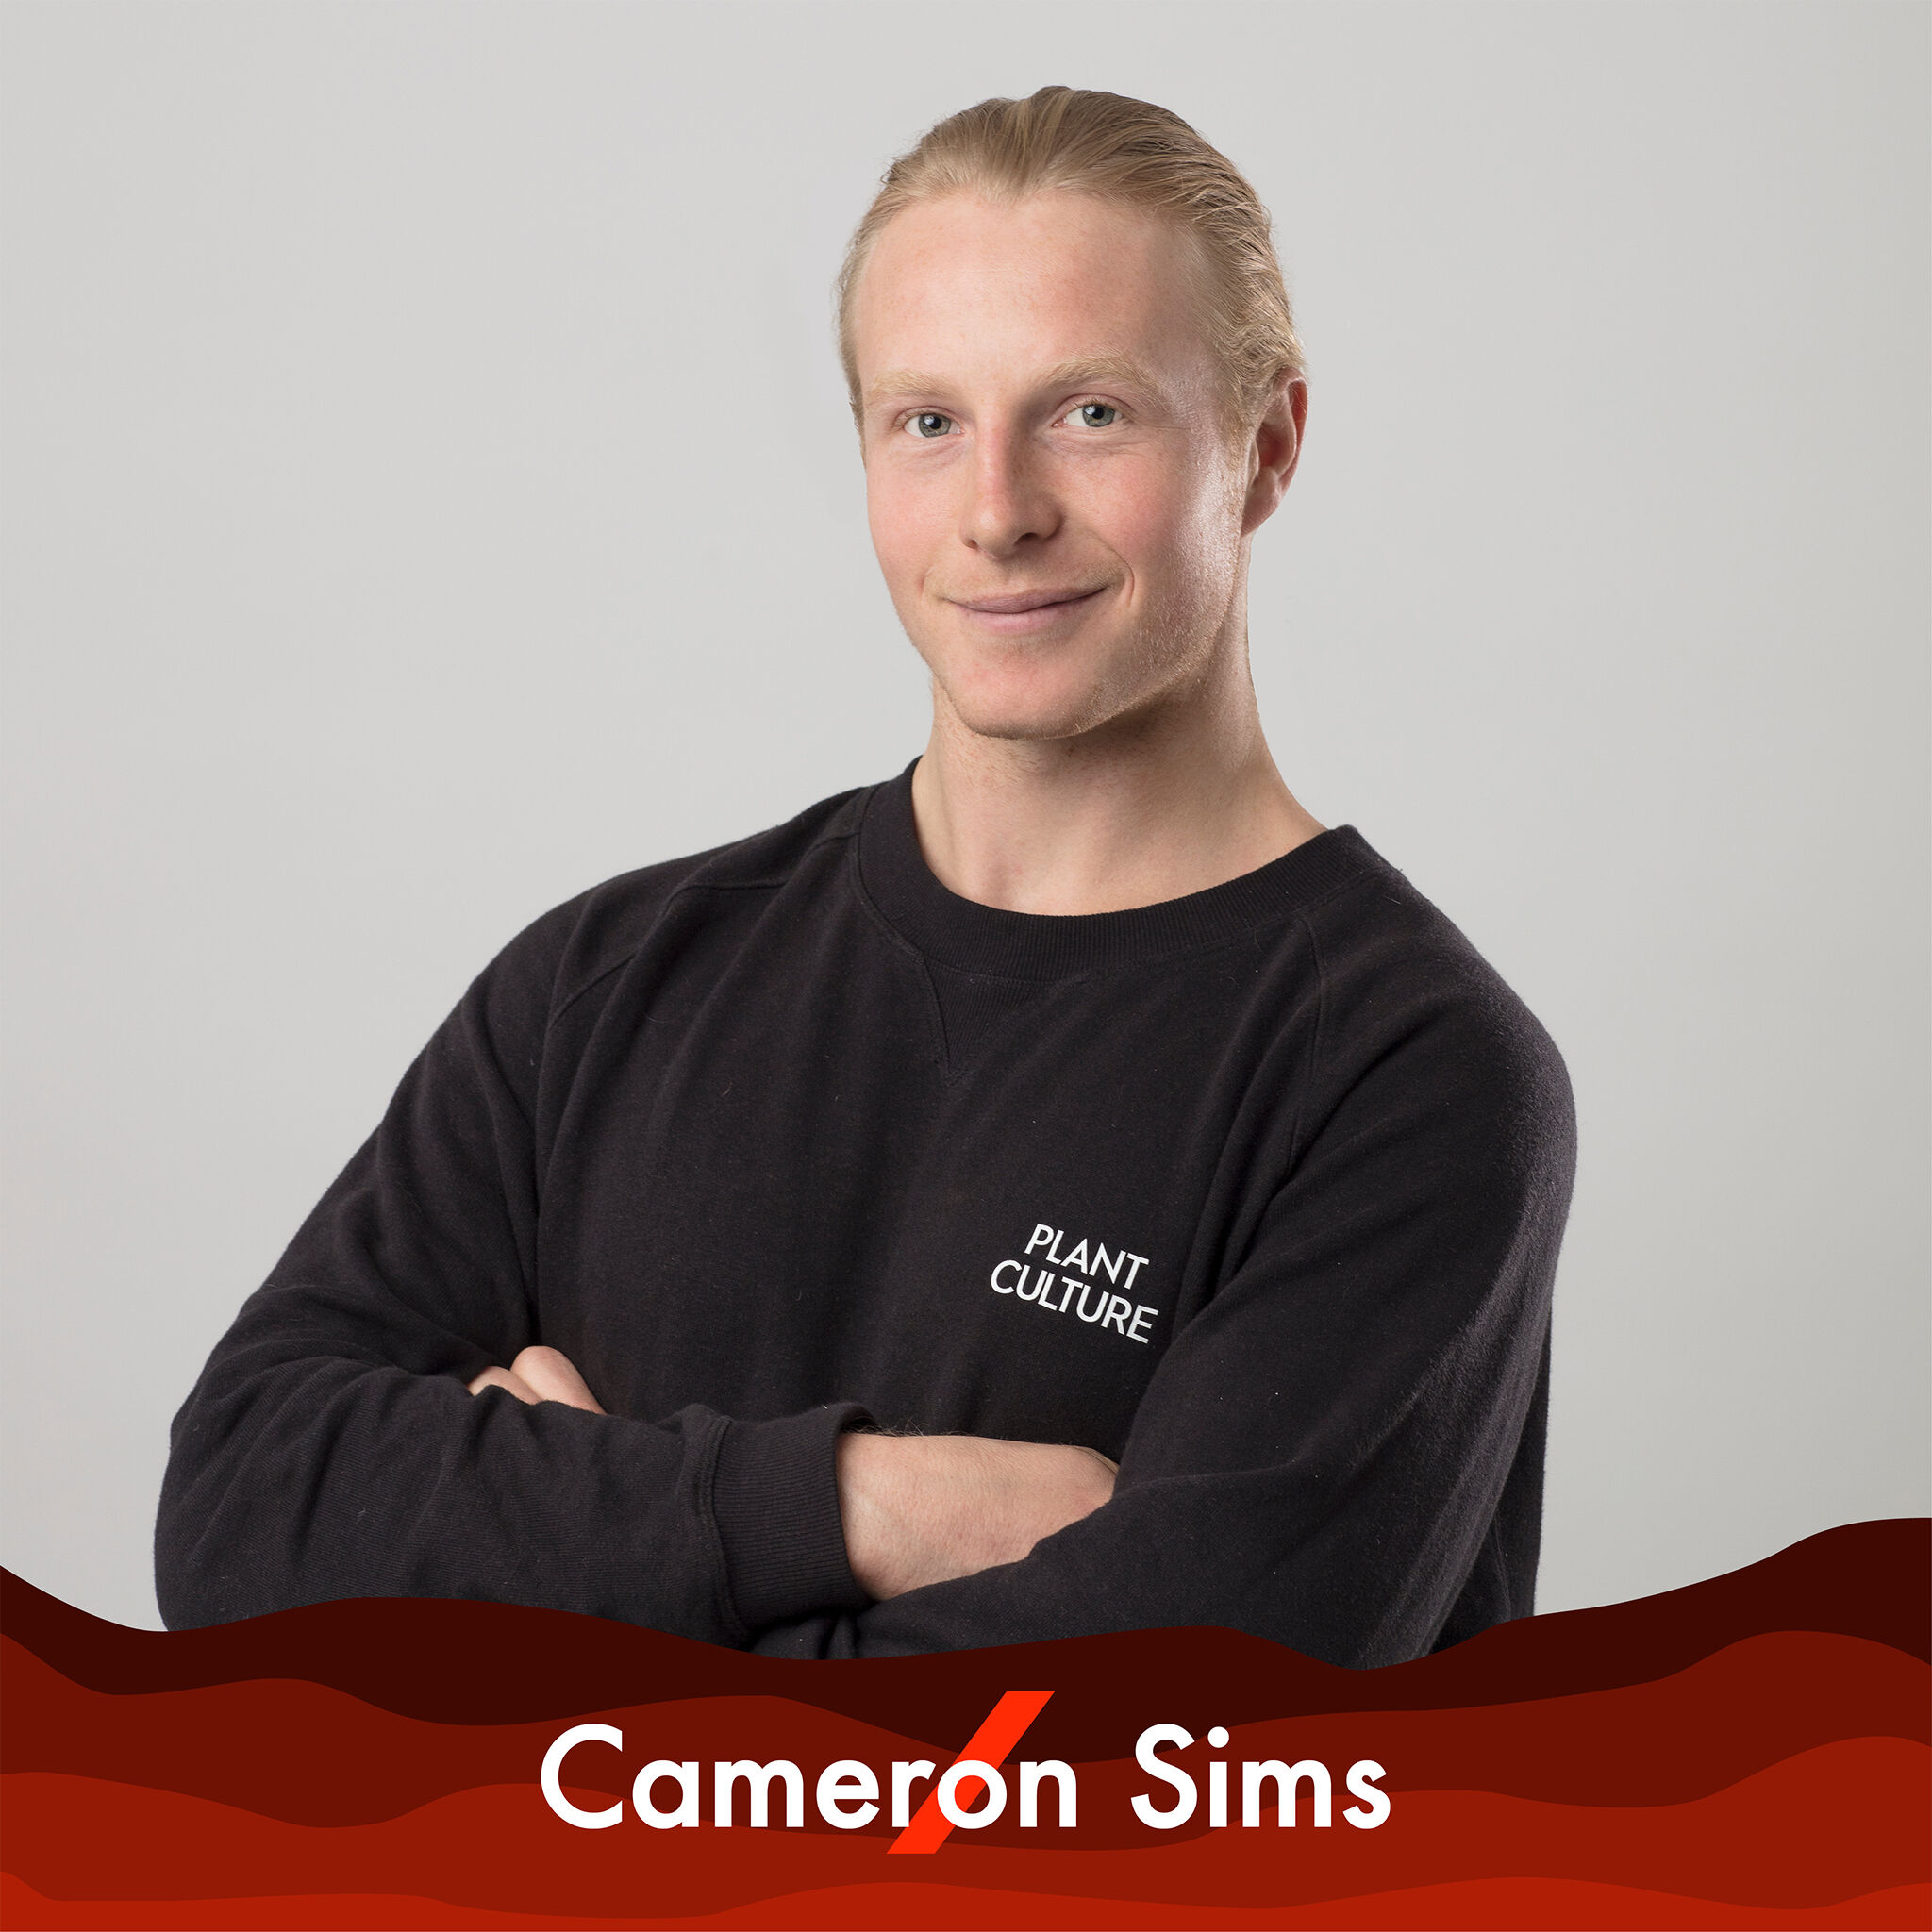 A picture of Cameron Sims